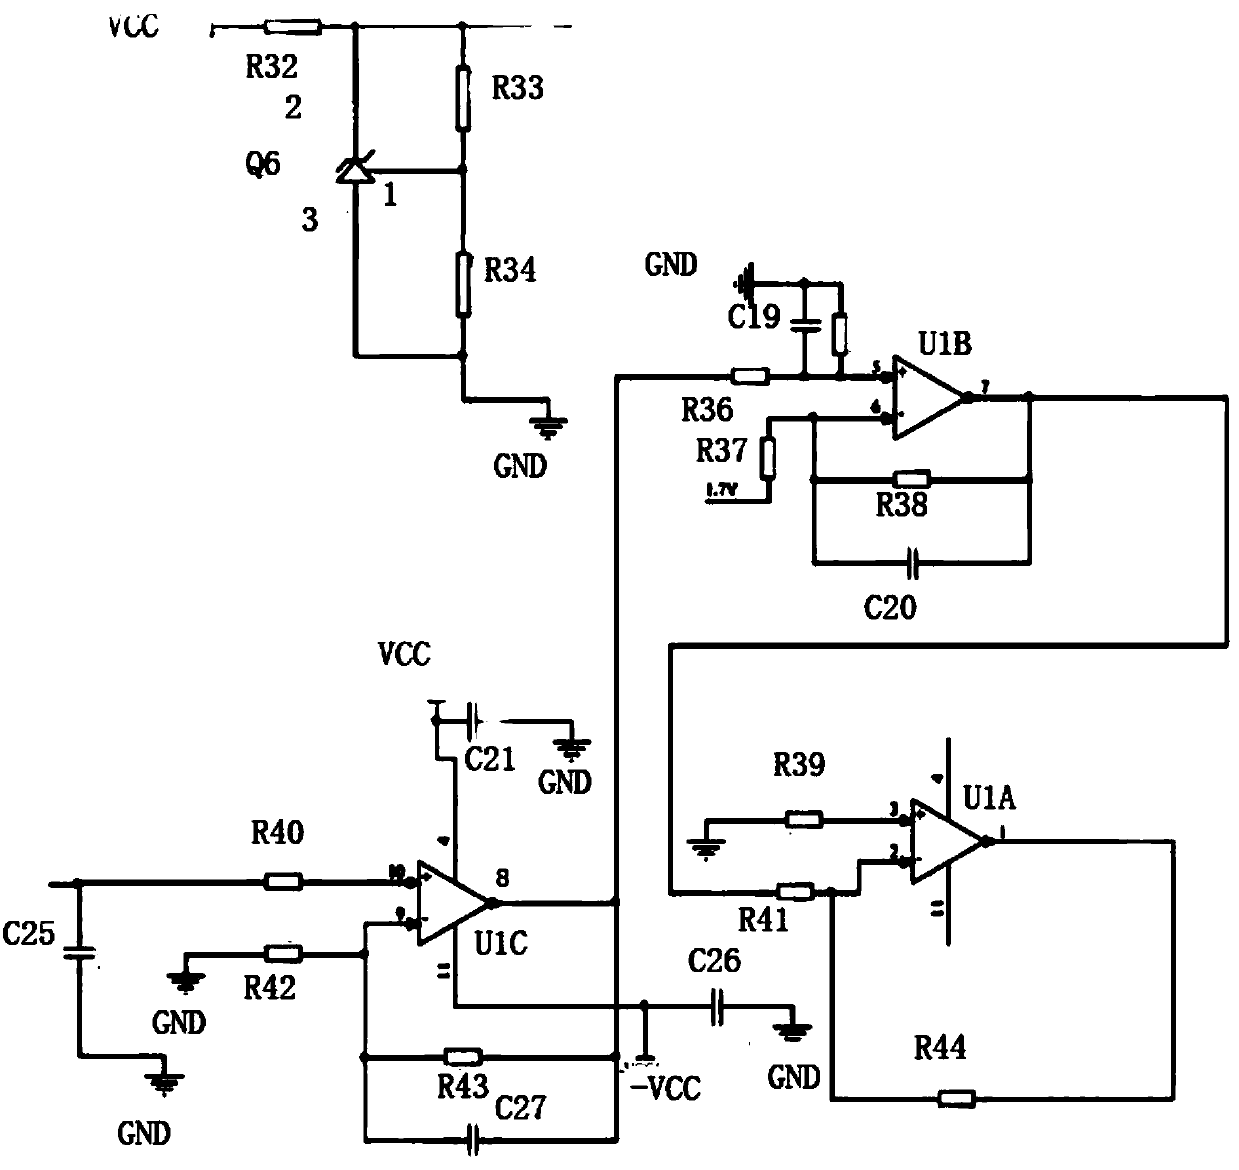 Sine wave power source satisfying inductive load frequent connection and disconnection and application of sine wave power source